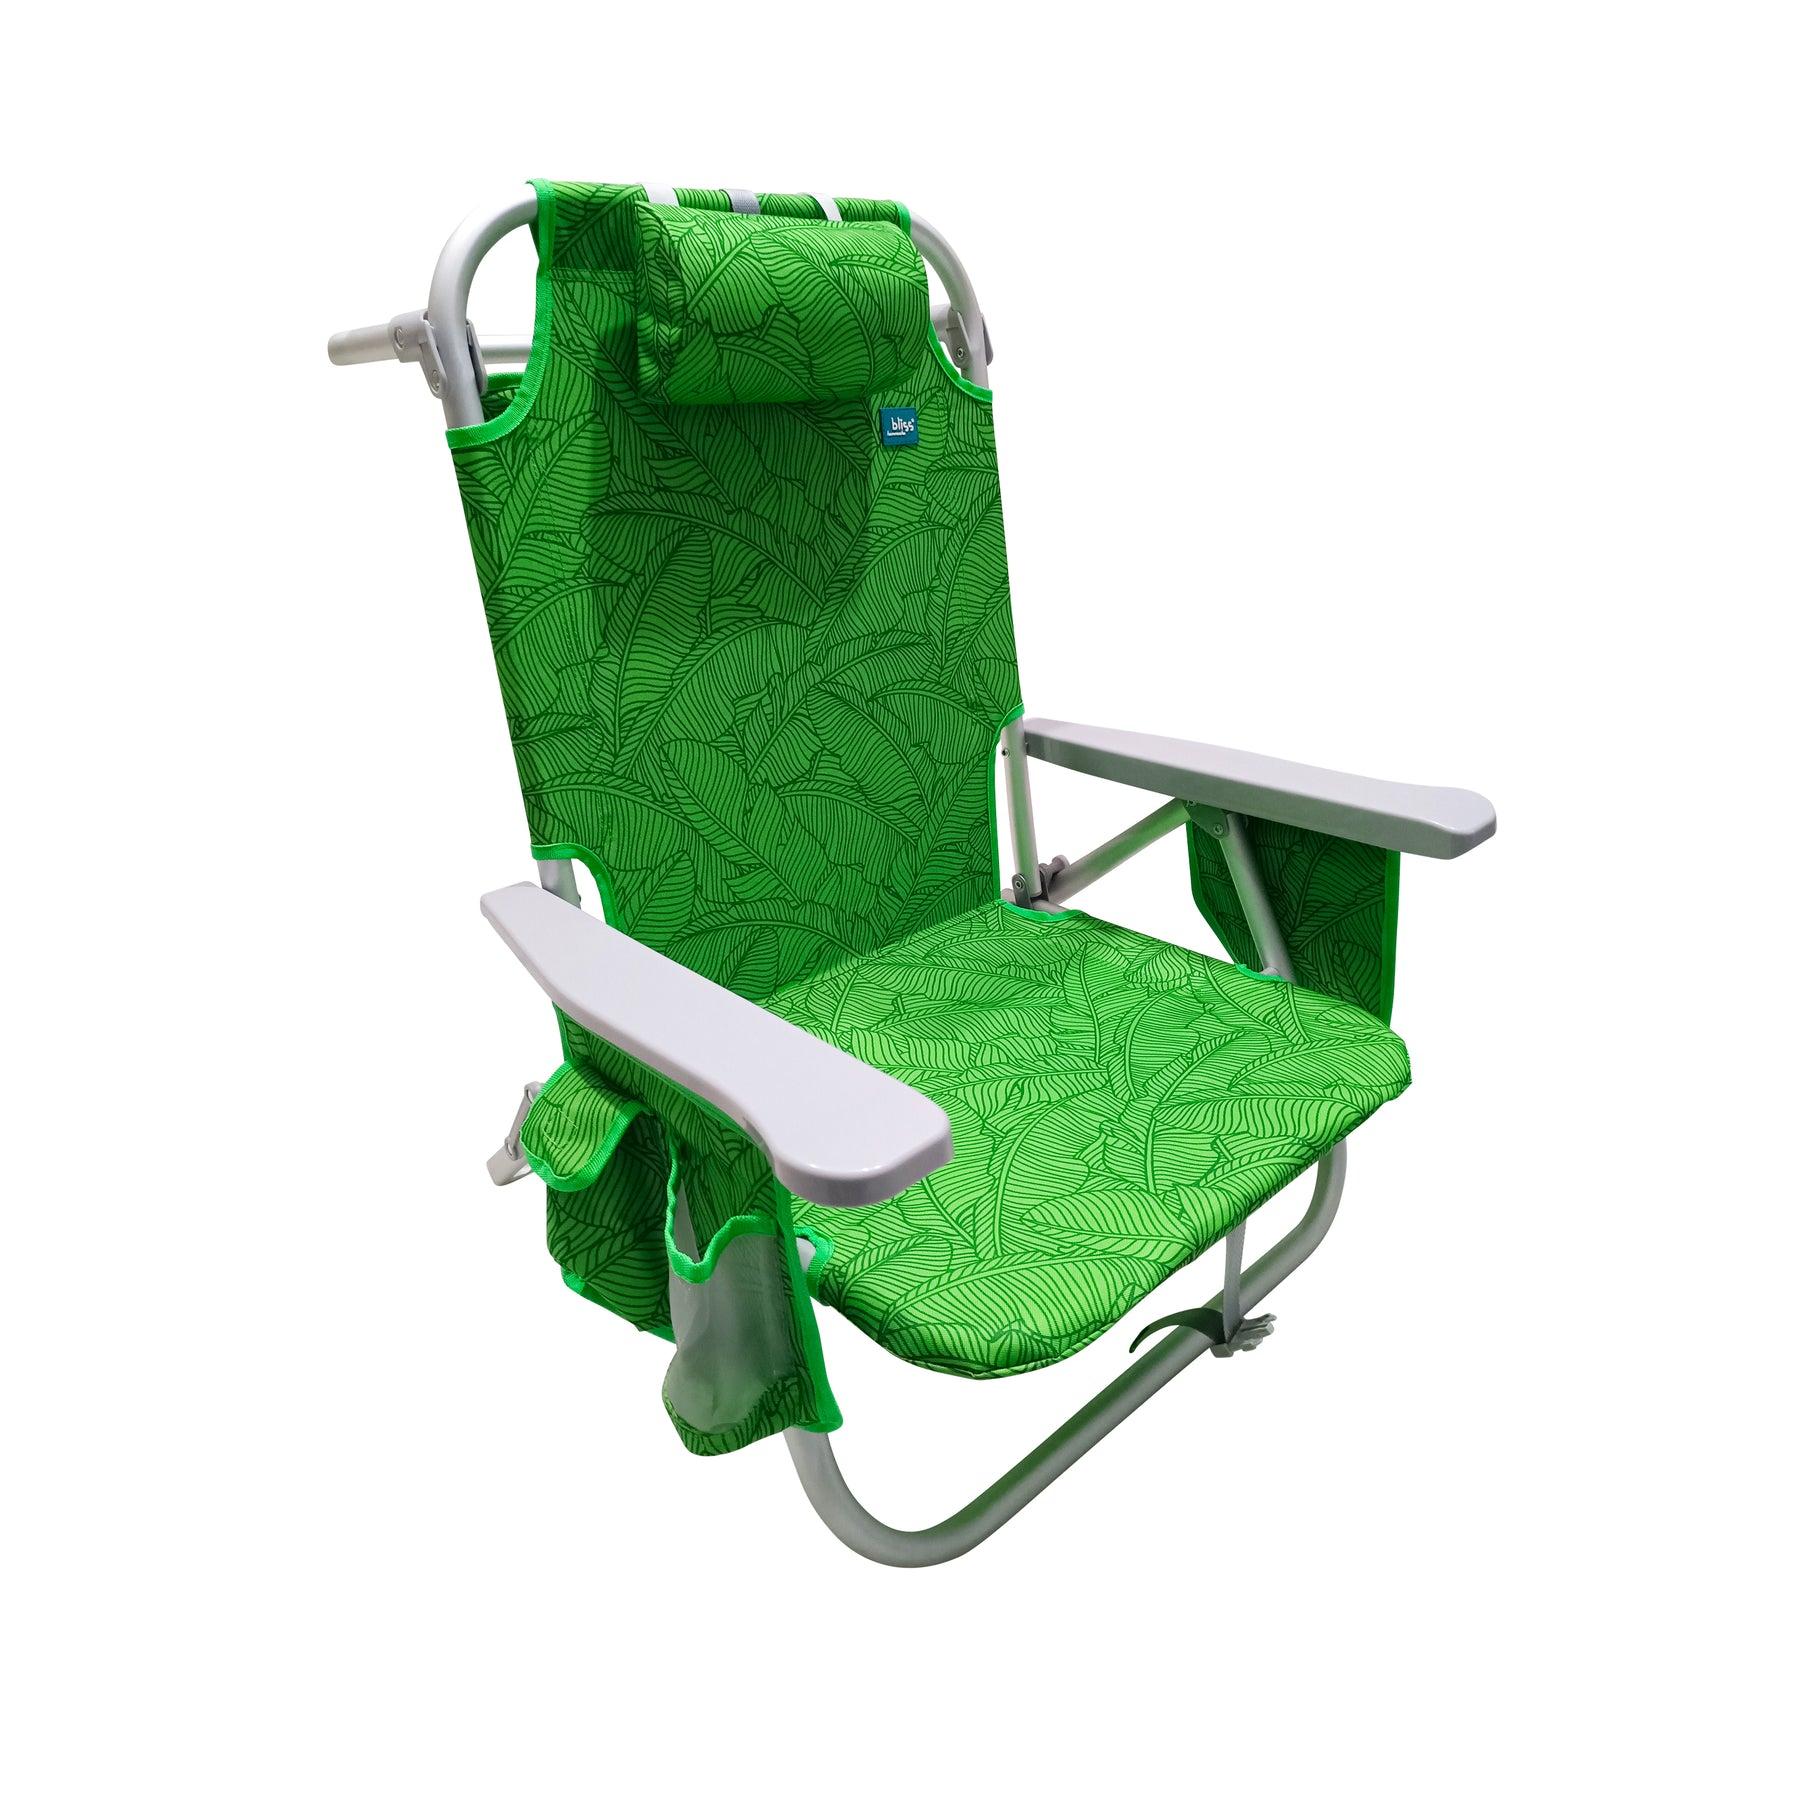 Bliss Hammocks Backpack Aluminum Beach Chair with a Side Pocket, 8 Reclining Positions, Foldable, and a Detachable Cooler Bag. Green Banana Leaves variation is a green color with a banana leaf pattern.